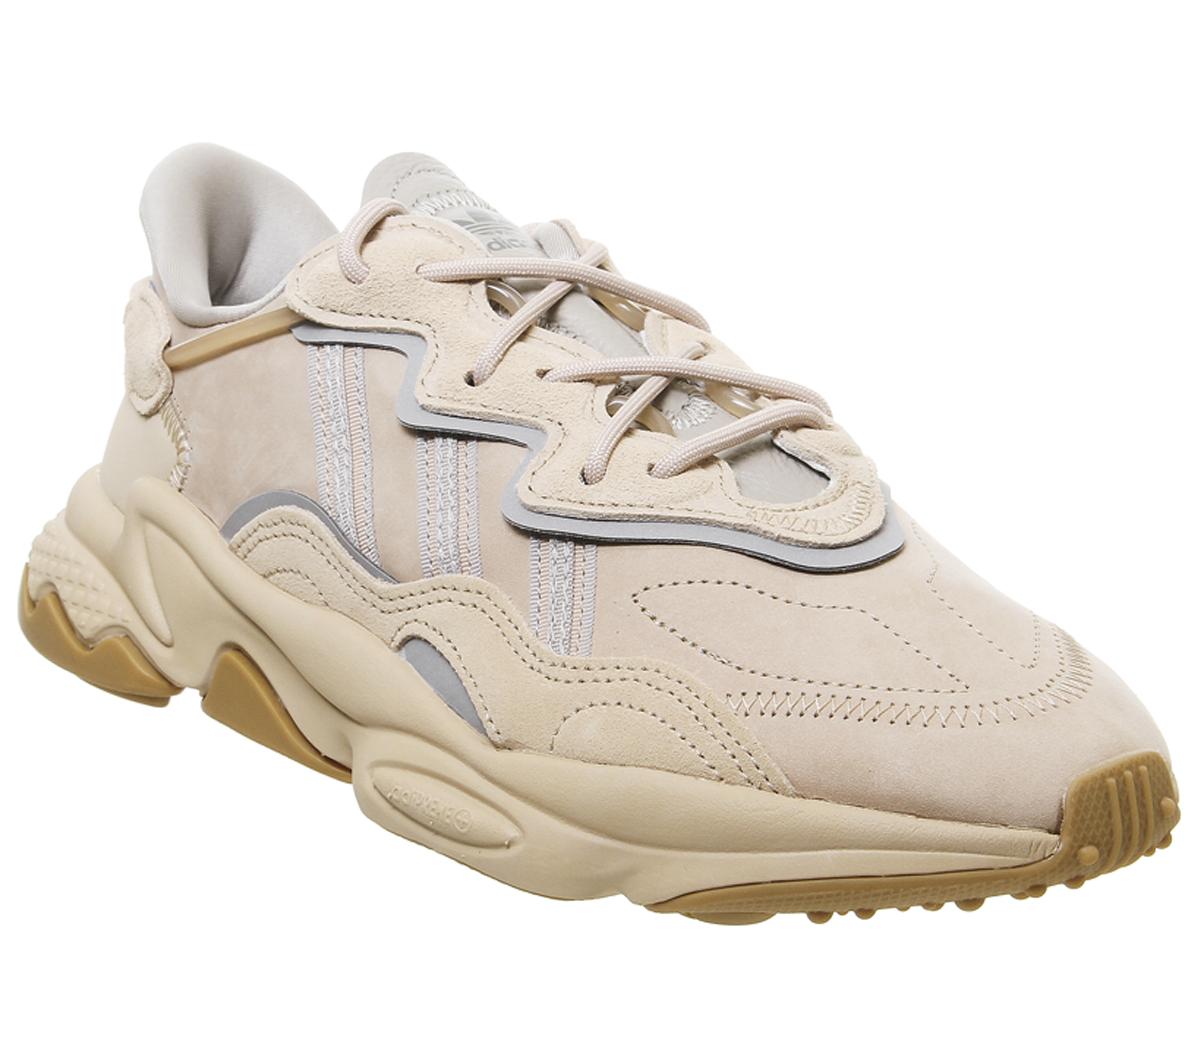 temperatura engranaje Inevitable adidas Ozweego Trainers Pale Nude Light Brown Solar Red - Unisex Sports